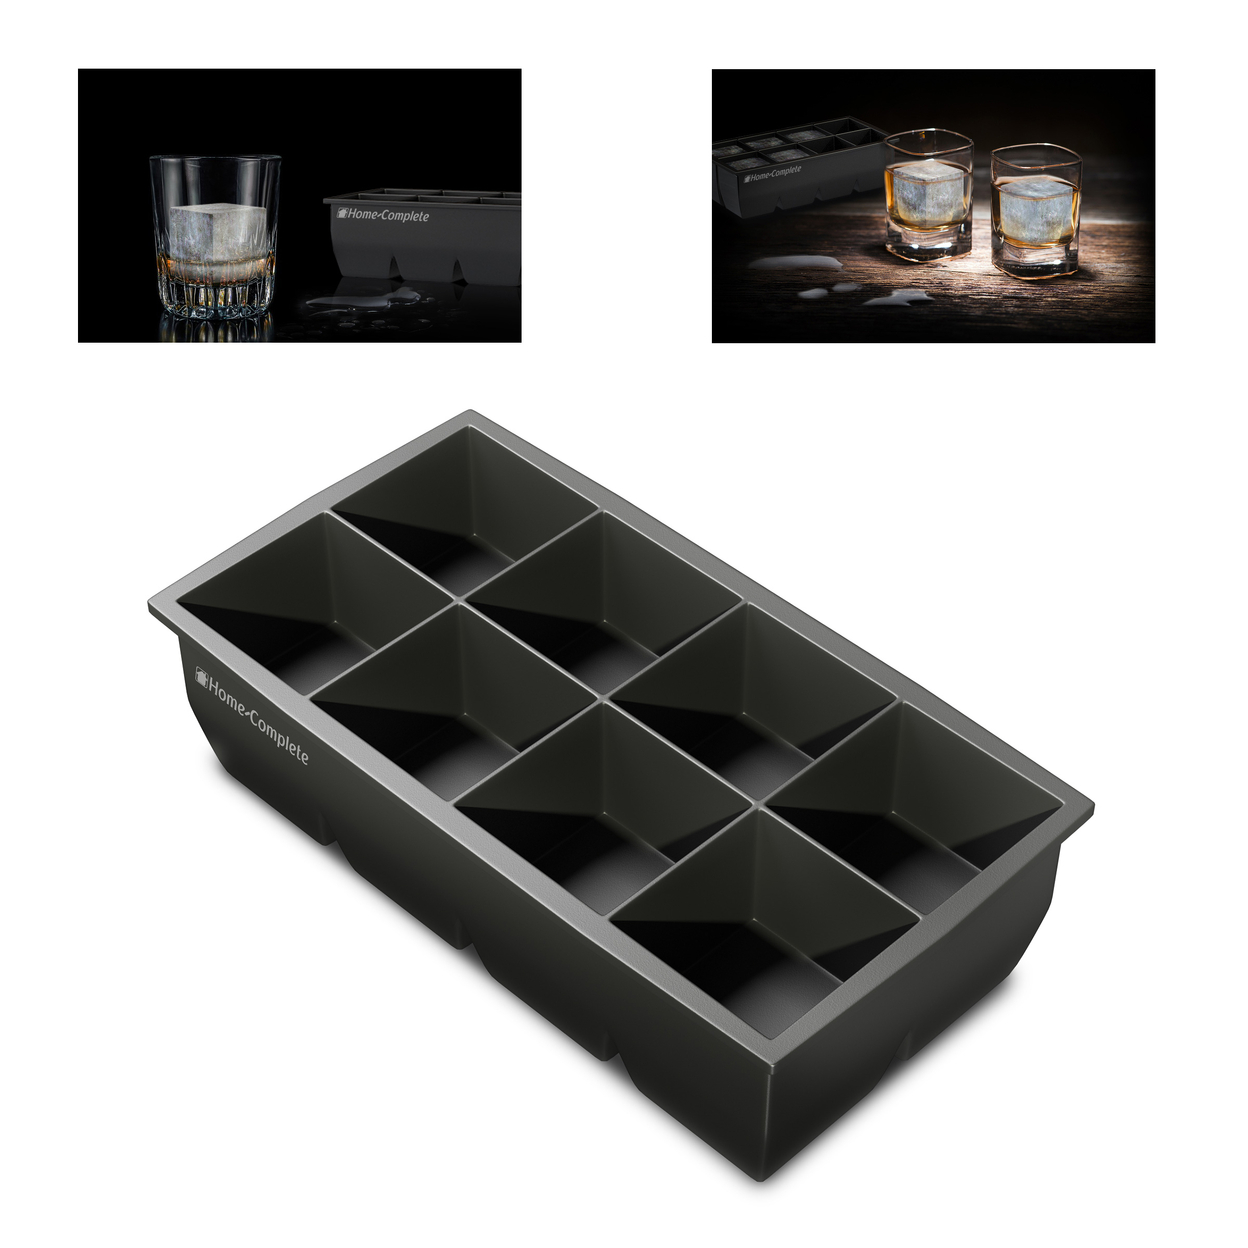 Large 2 Inch Ice Cube Tray Mold Whiskey Cocktails Silicone Make 8 Icecubes